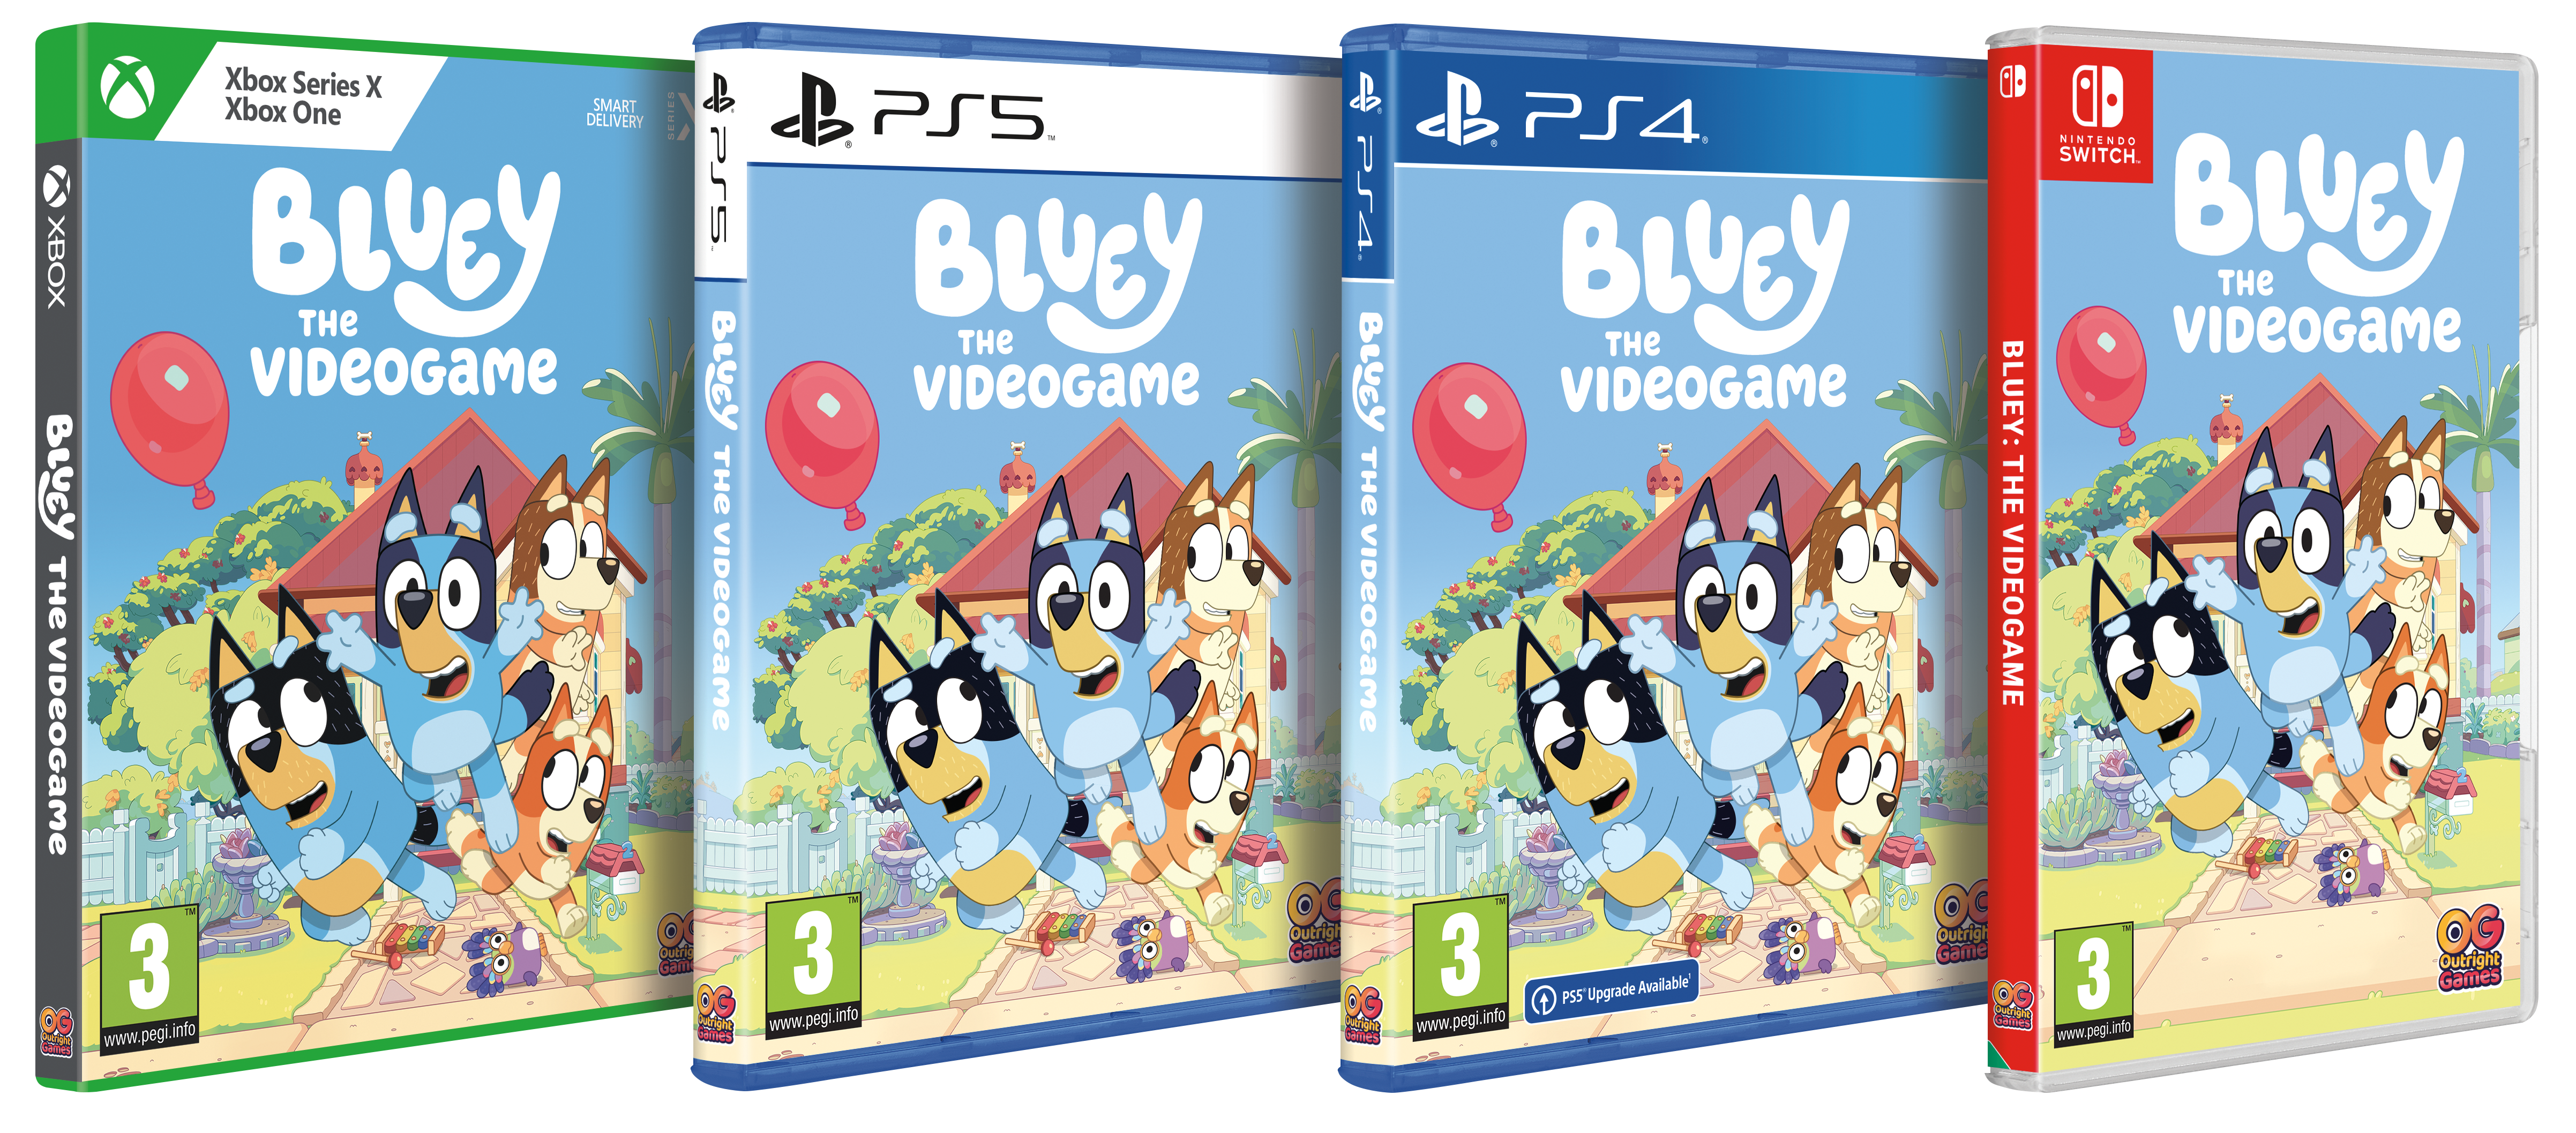 Bluey the videogame: Release date, trailer and more